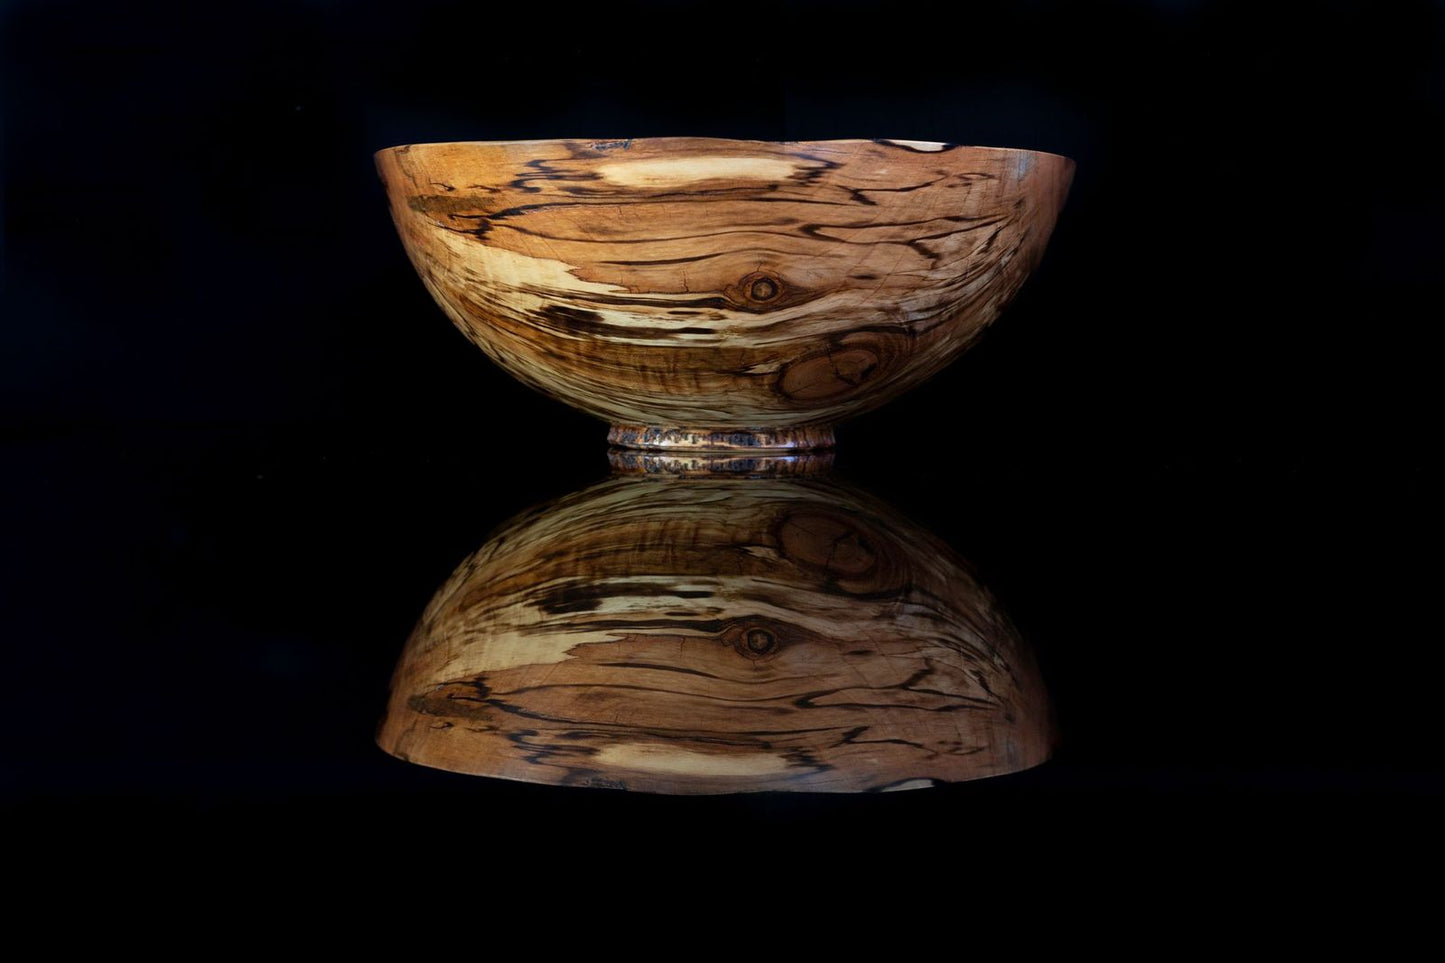 Black Beech Wood Bowl by Woodturner Mark Russell No387